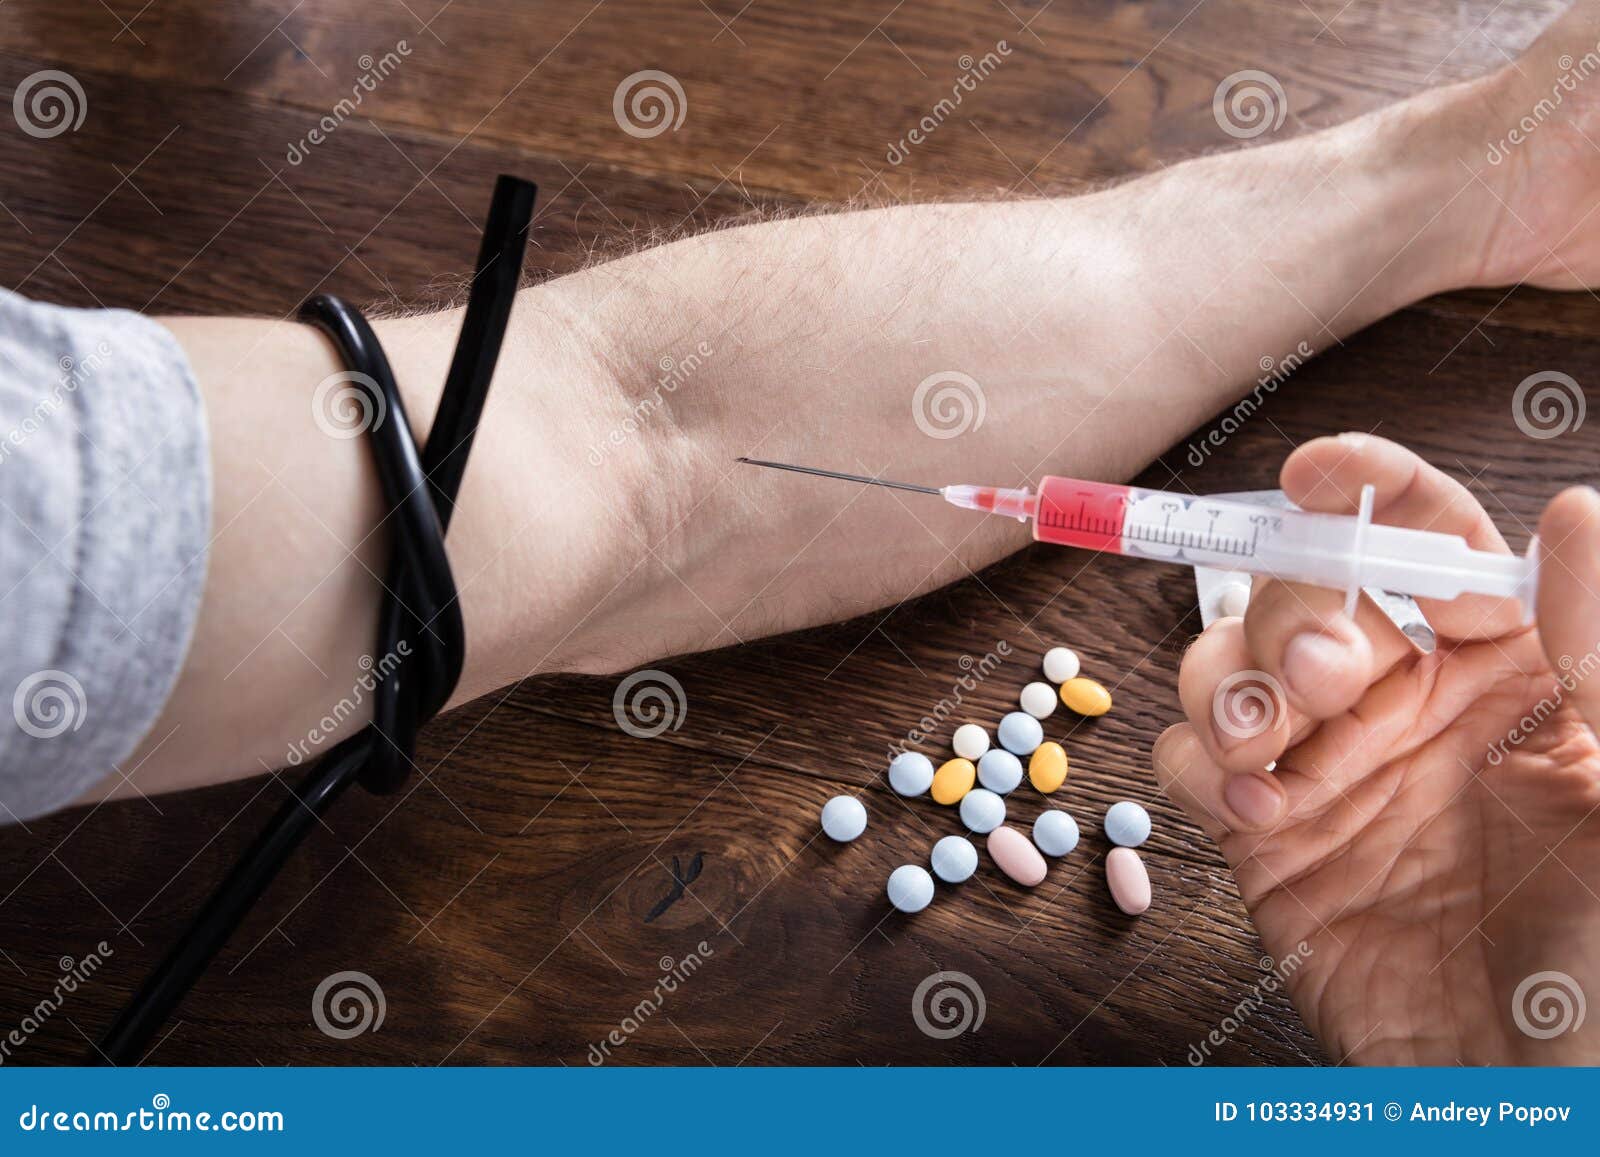 Photo about Close-up Of A Person Hand Injecting Heroin Drug. 